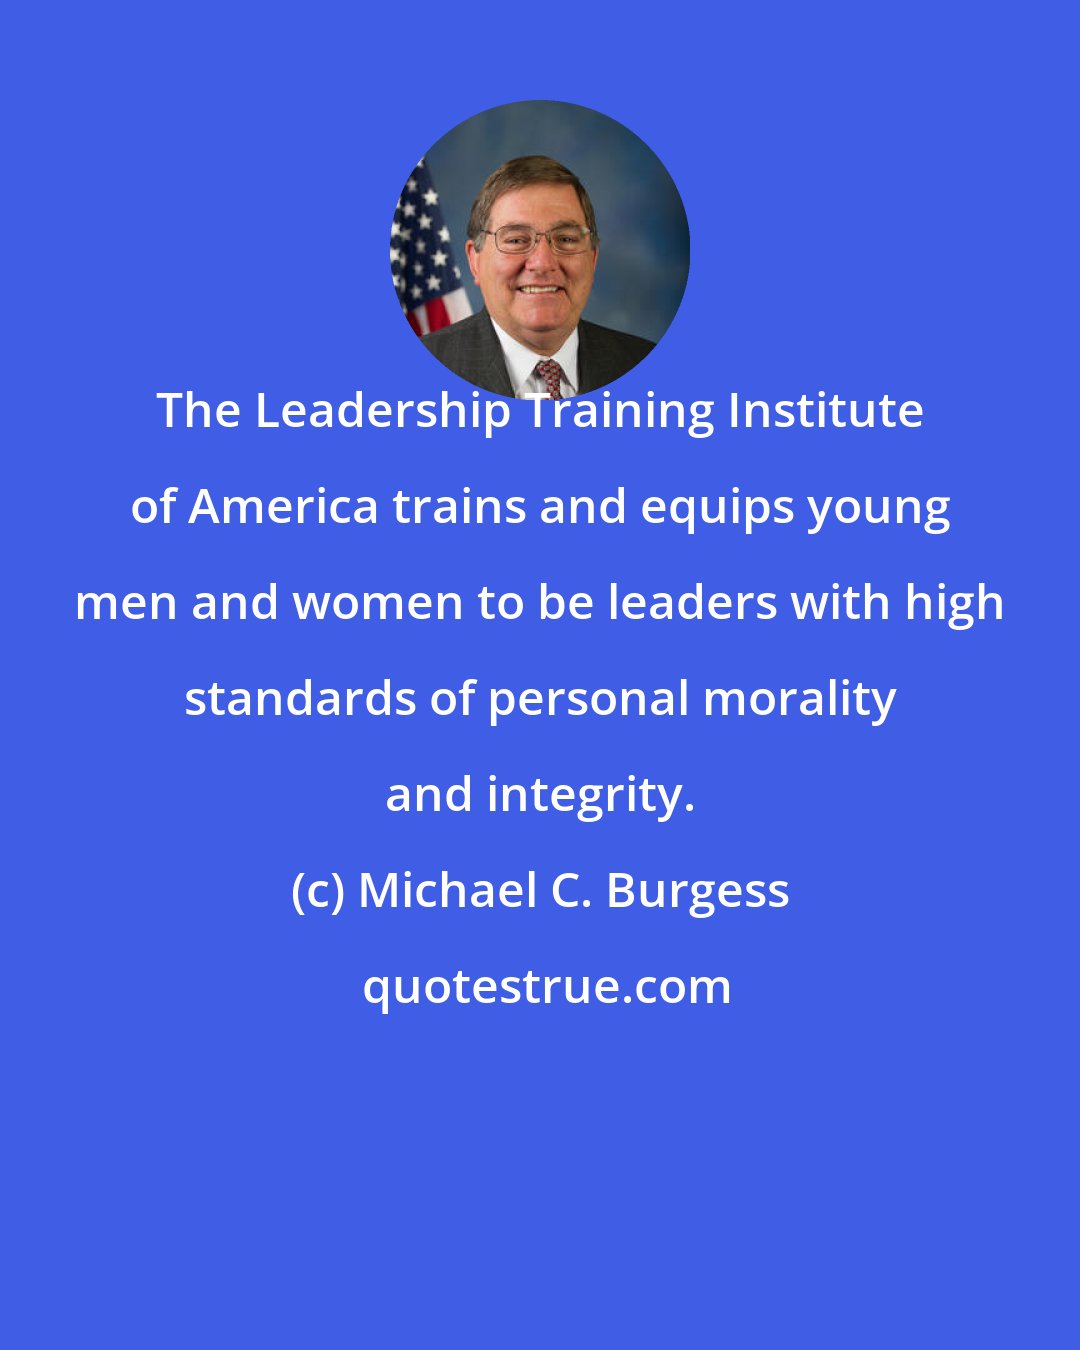 Michael C. Burgess: The Leadership Training Institute of America trains and equips young men and women to be leaders with high standards of personal morality and integrity.